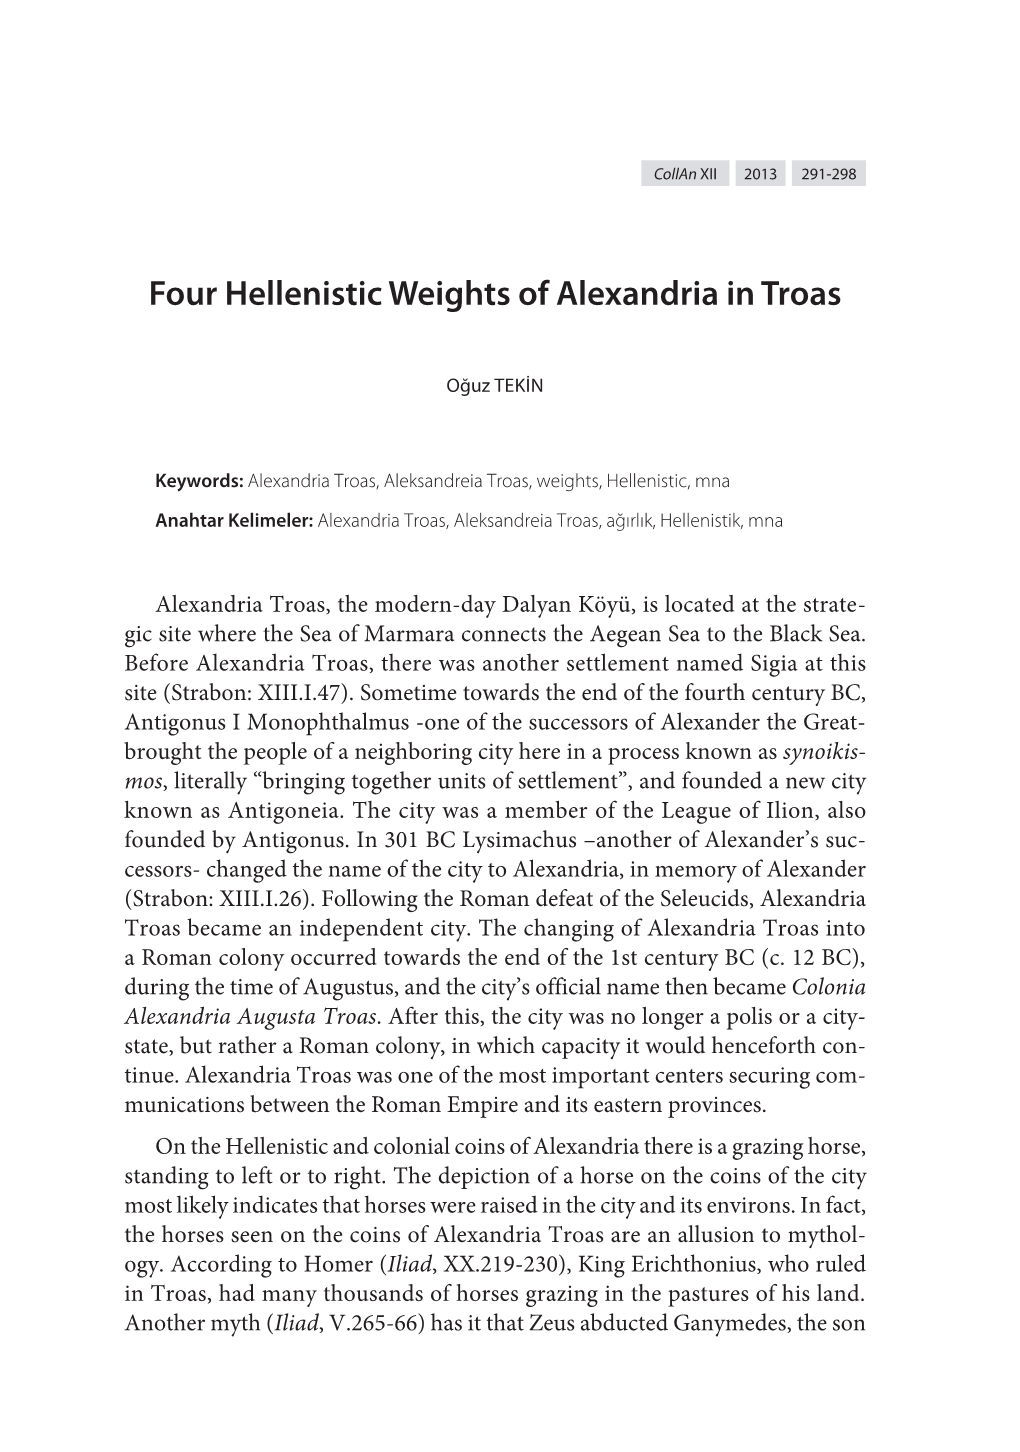 Four Hellenistic Weights of Alexandria in Troas